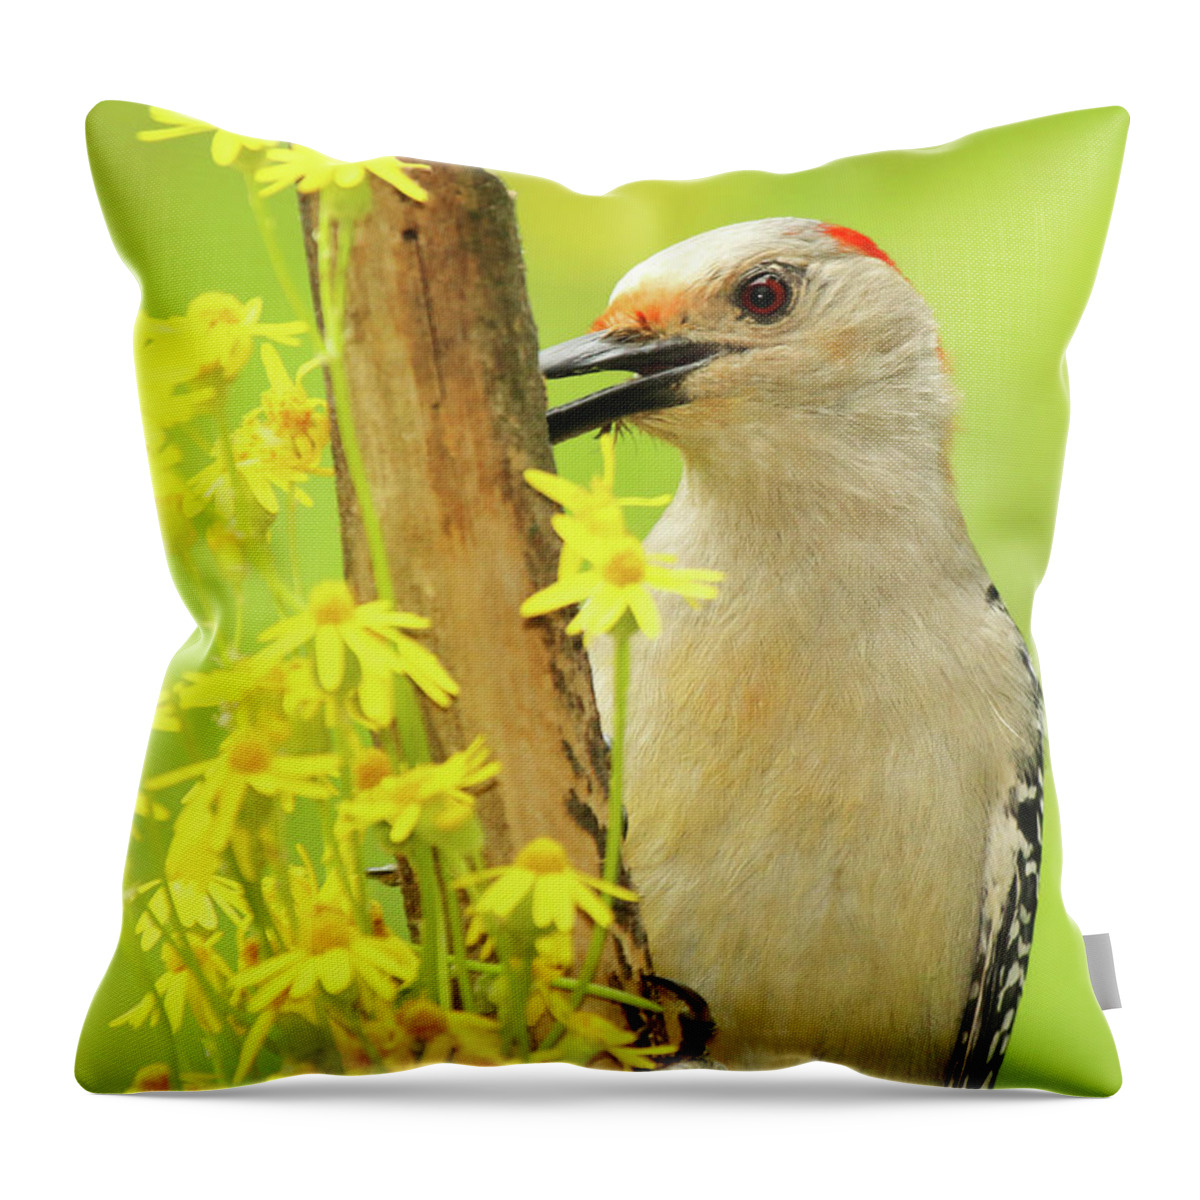 Bird Throw Pillow featuring the photograph Woodpecker Among Yellow Flowers by Max Allen